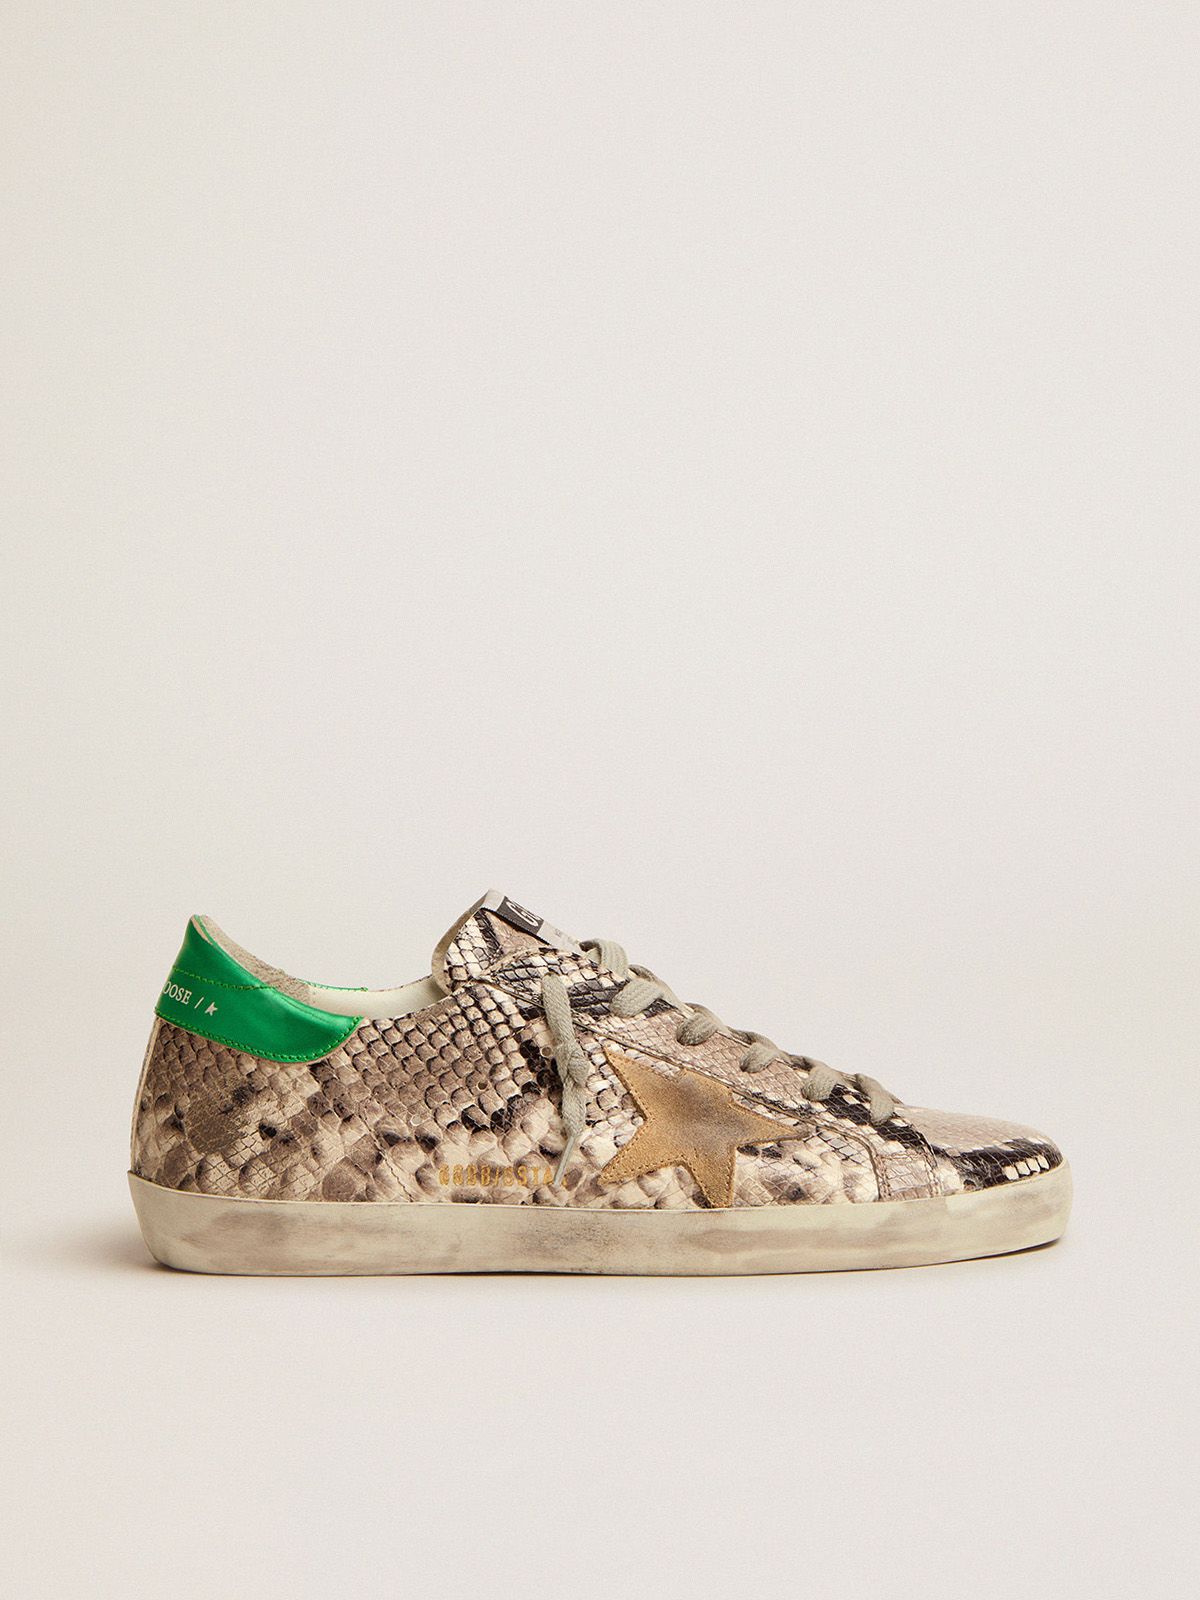 Super-Star LTD sneakers with snake-print leather upper and green laminated leather heel tab